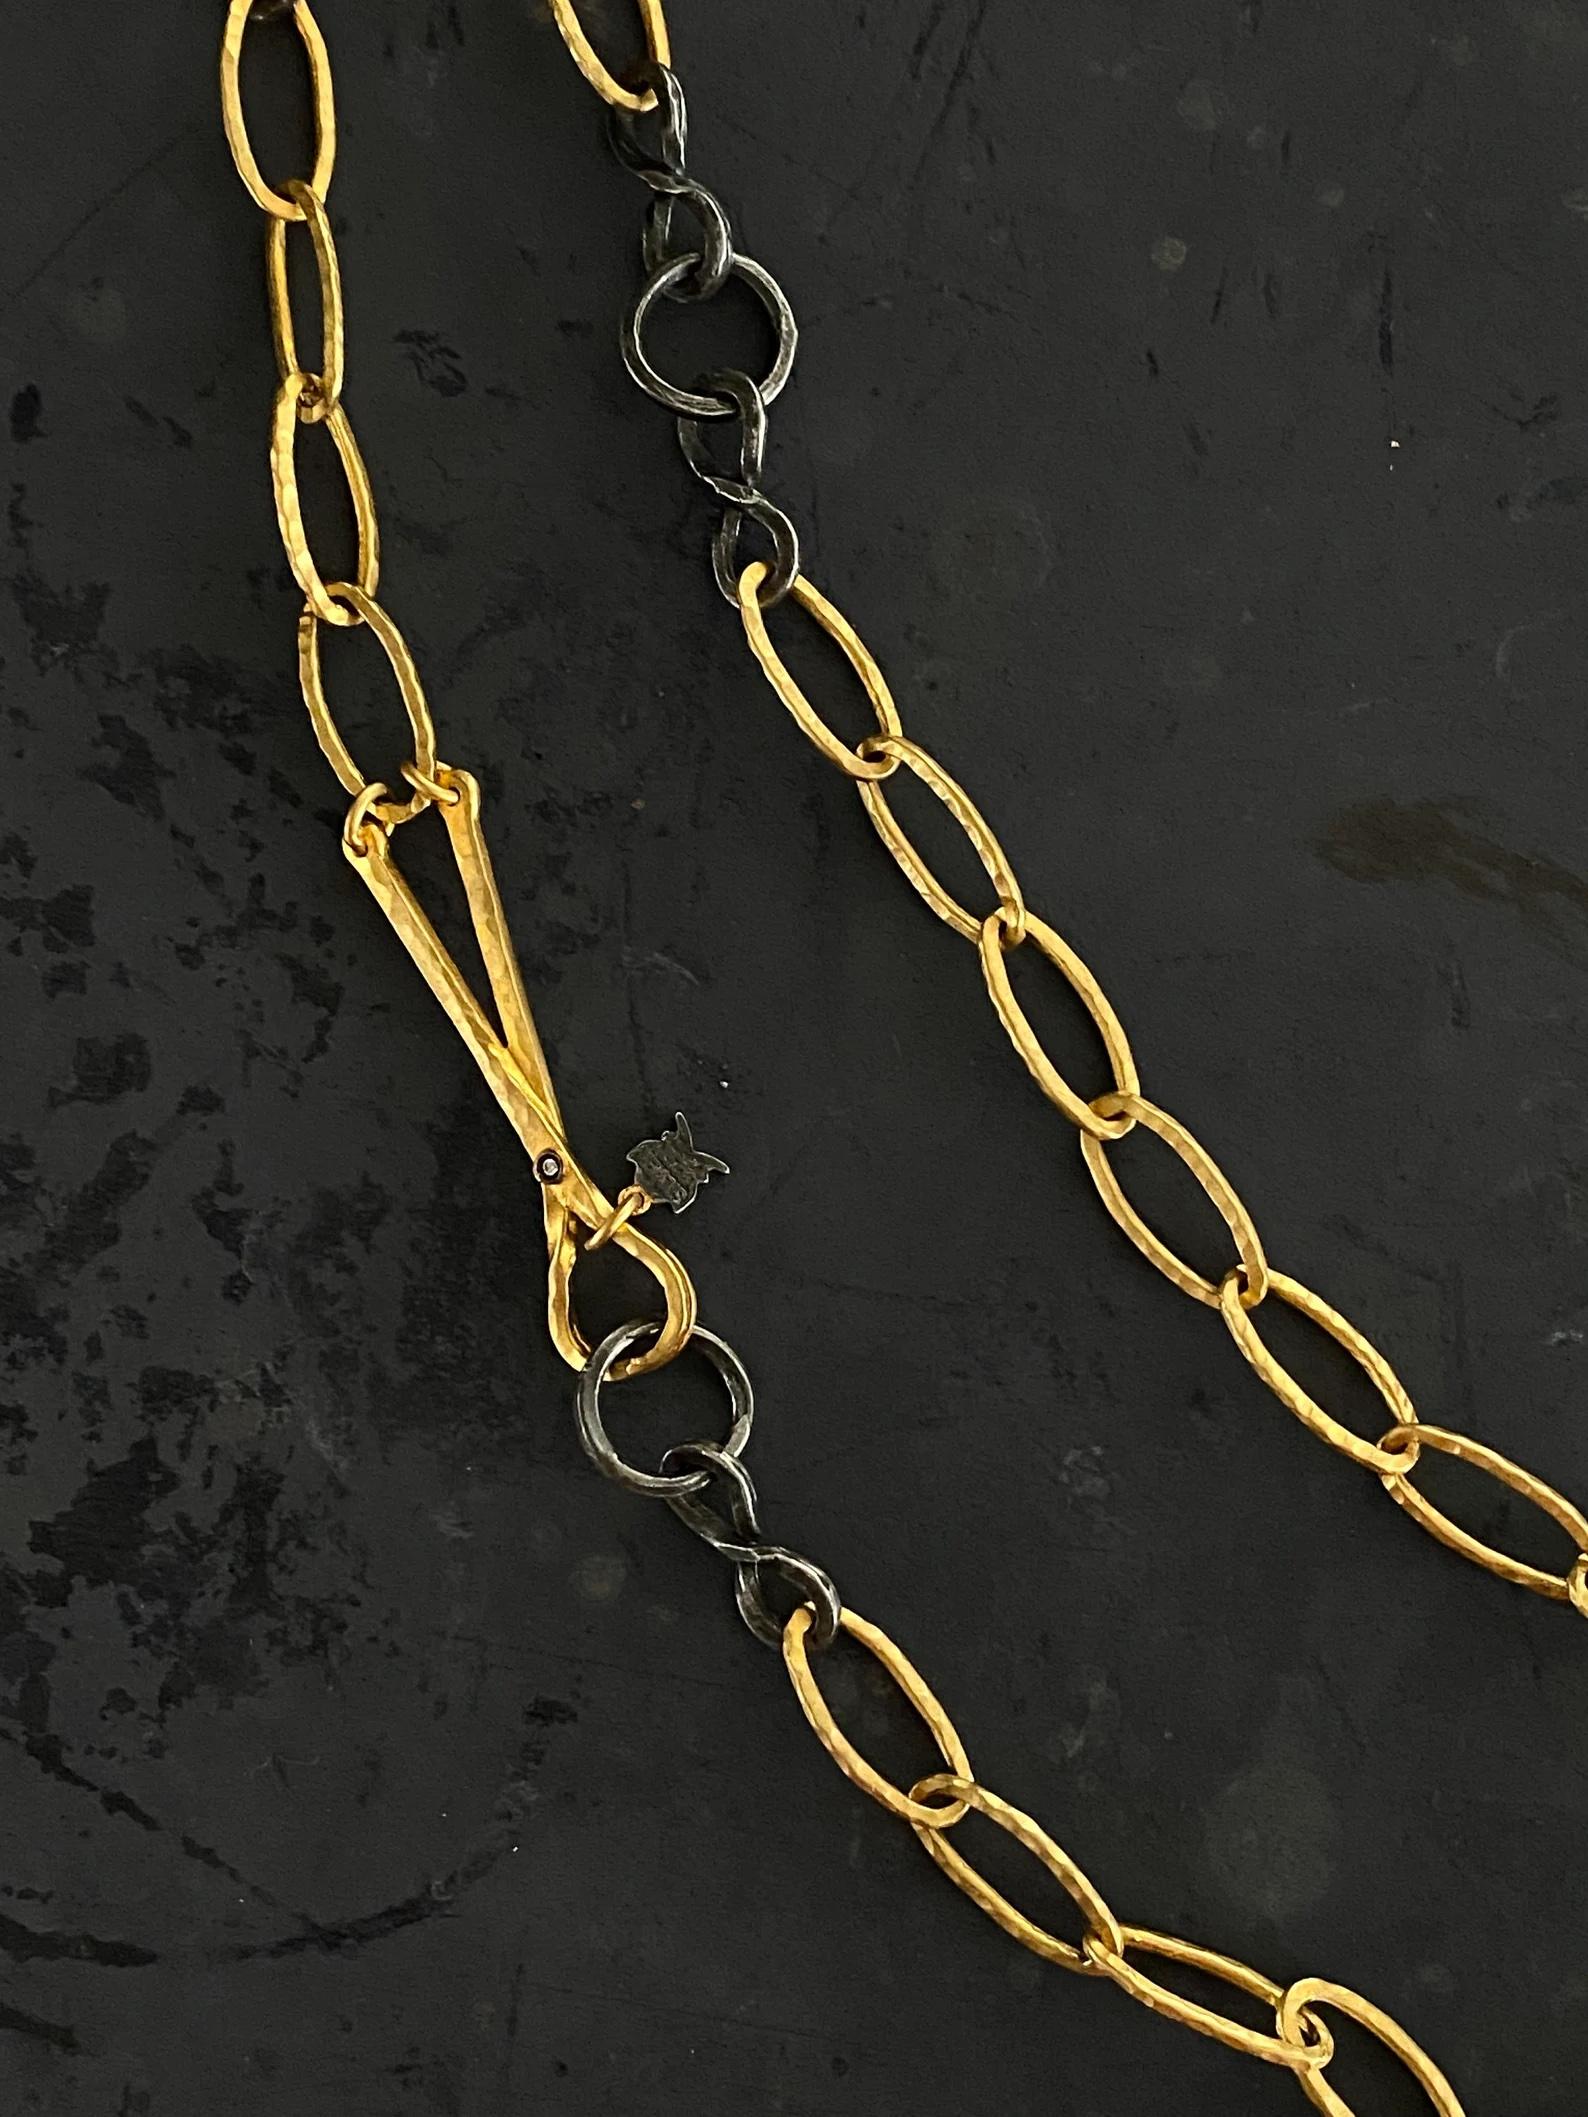 The Chain of Goldenhorn, 24K Yellow Gold and Silver with Diamonds, by Kurtulan Jewellry of Istanbul, Turkey.  This necklace is made to order by Kurtulan in Istanbul, Turkey.  Delivery takes approximately 4-6 weeks.

Chain length: 38”
Sterling - 925